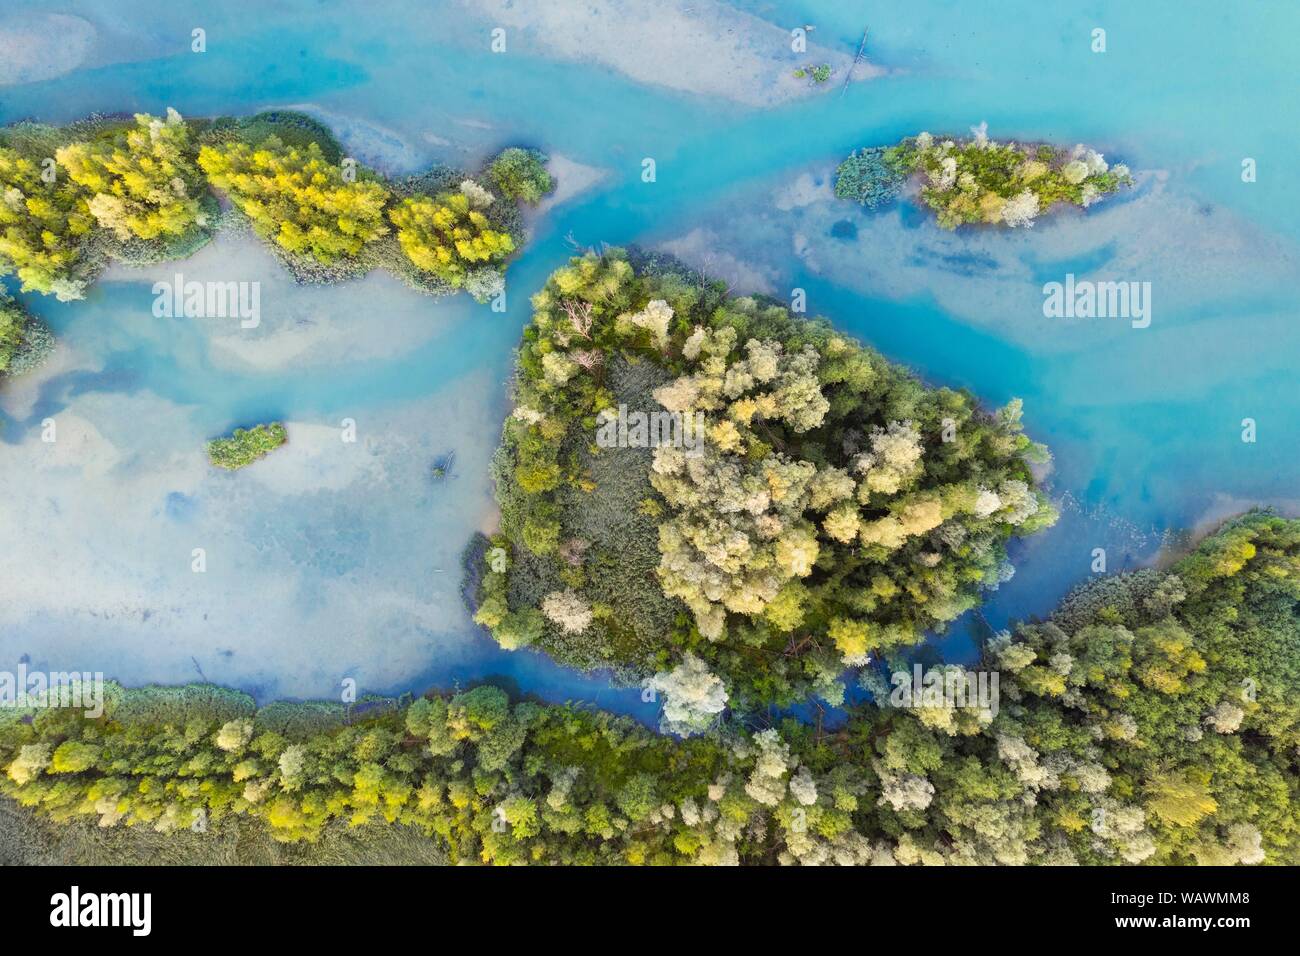 Wooded small islands in the Isar reservoir Tolz, Bad Tolz, Isarwinkel, aerial view, Upper Bavaria, Bavaria, Germany Stock Photo